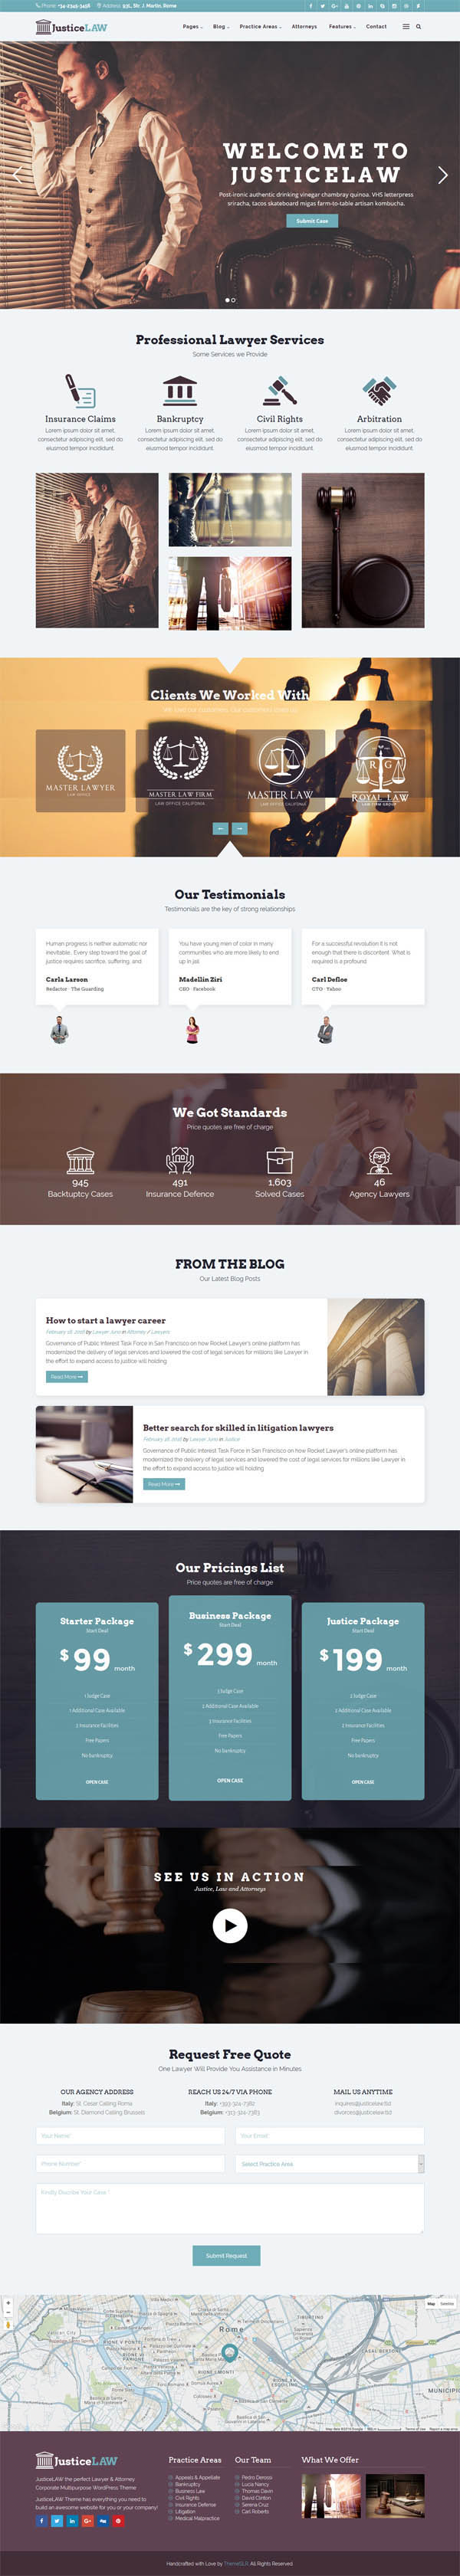 JusticeLAW : Corporate WordPress Theme for Lawyers Attorneys and Law Firms